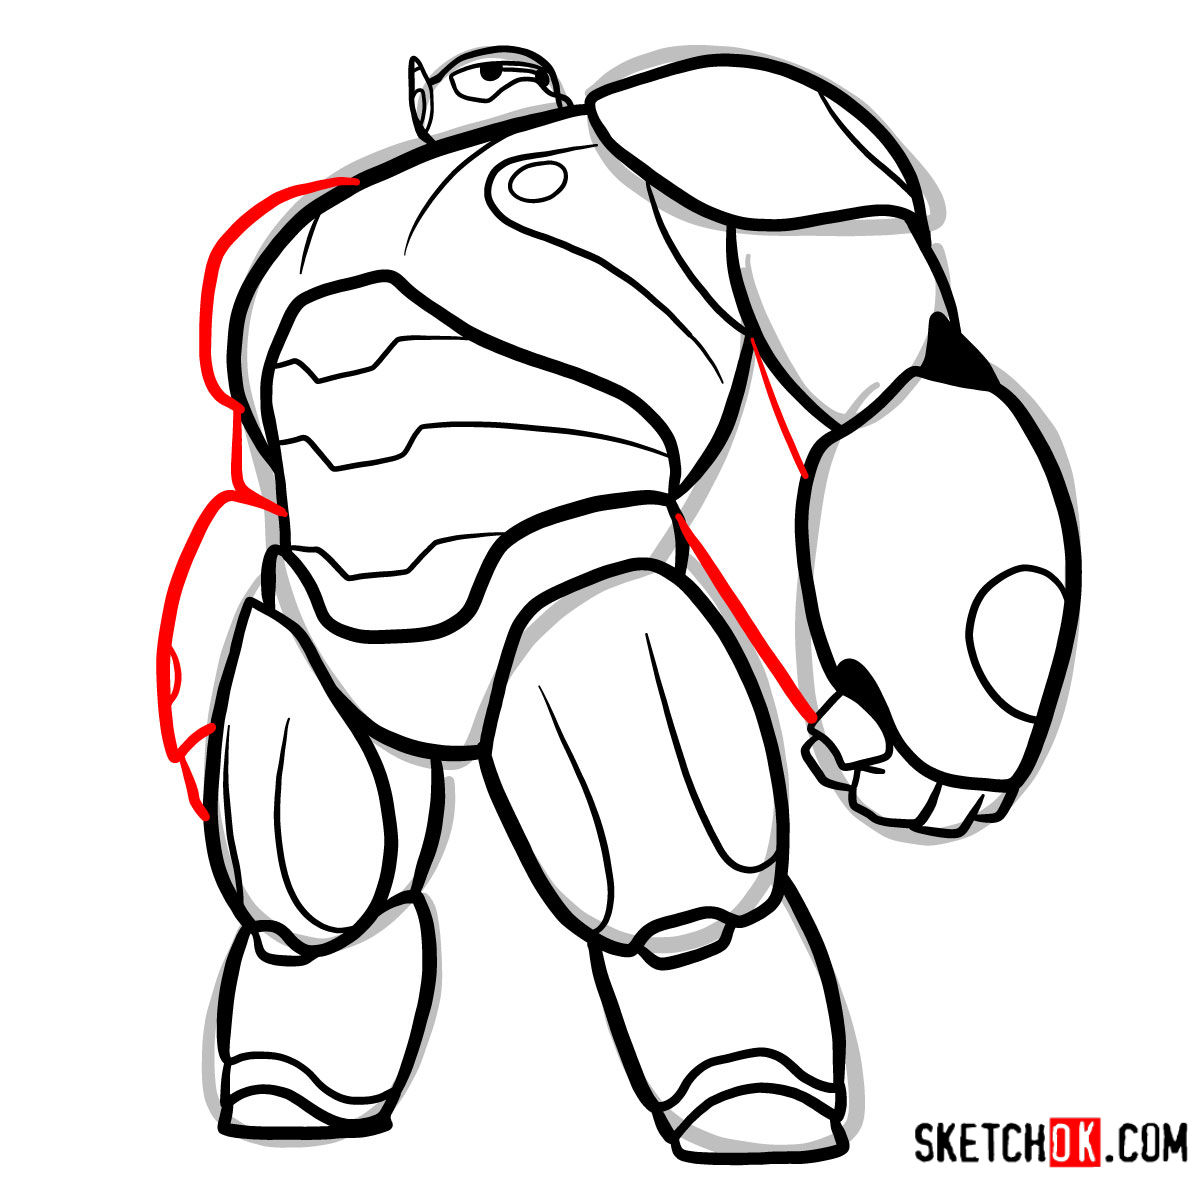 How to draw Baymax in his red armored suit - step 11